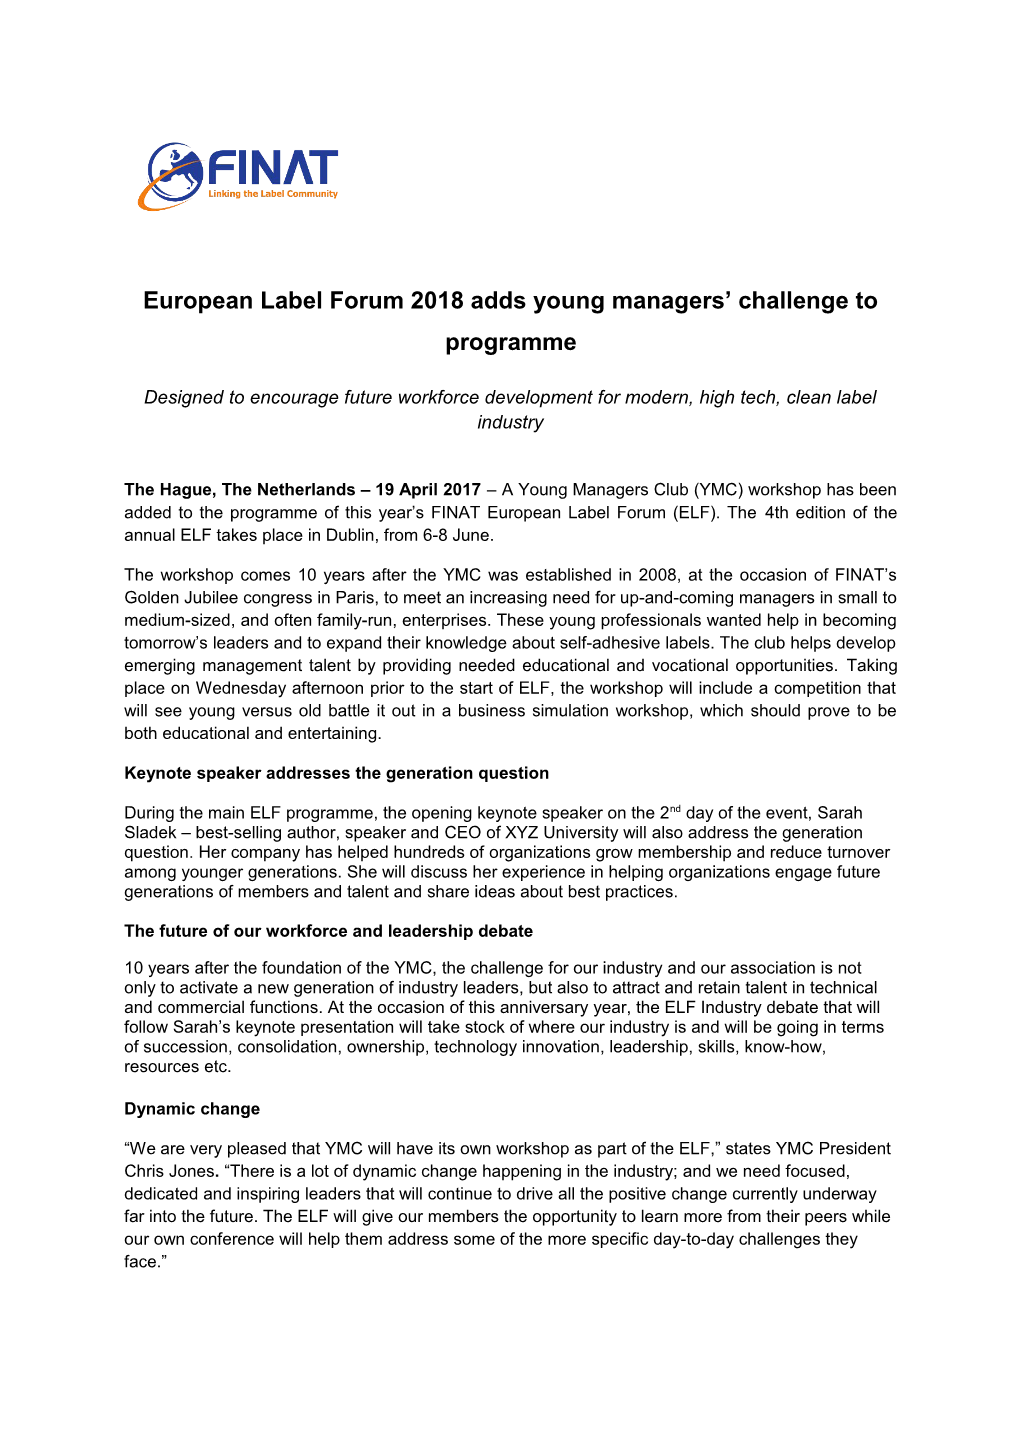 European Label Forum 2018 Adds Young Managers Challenge to Programme